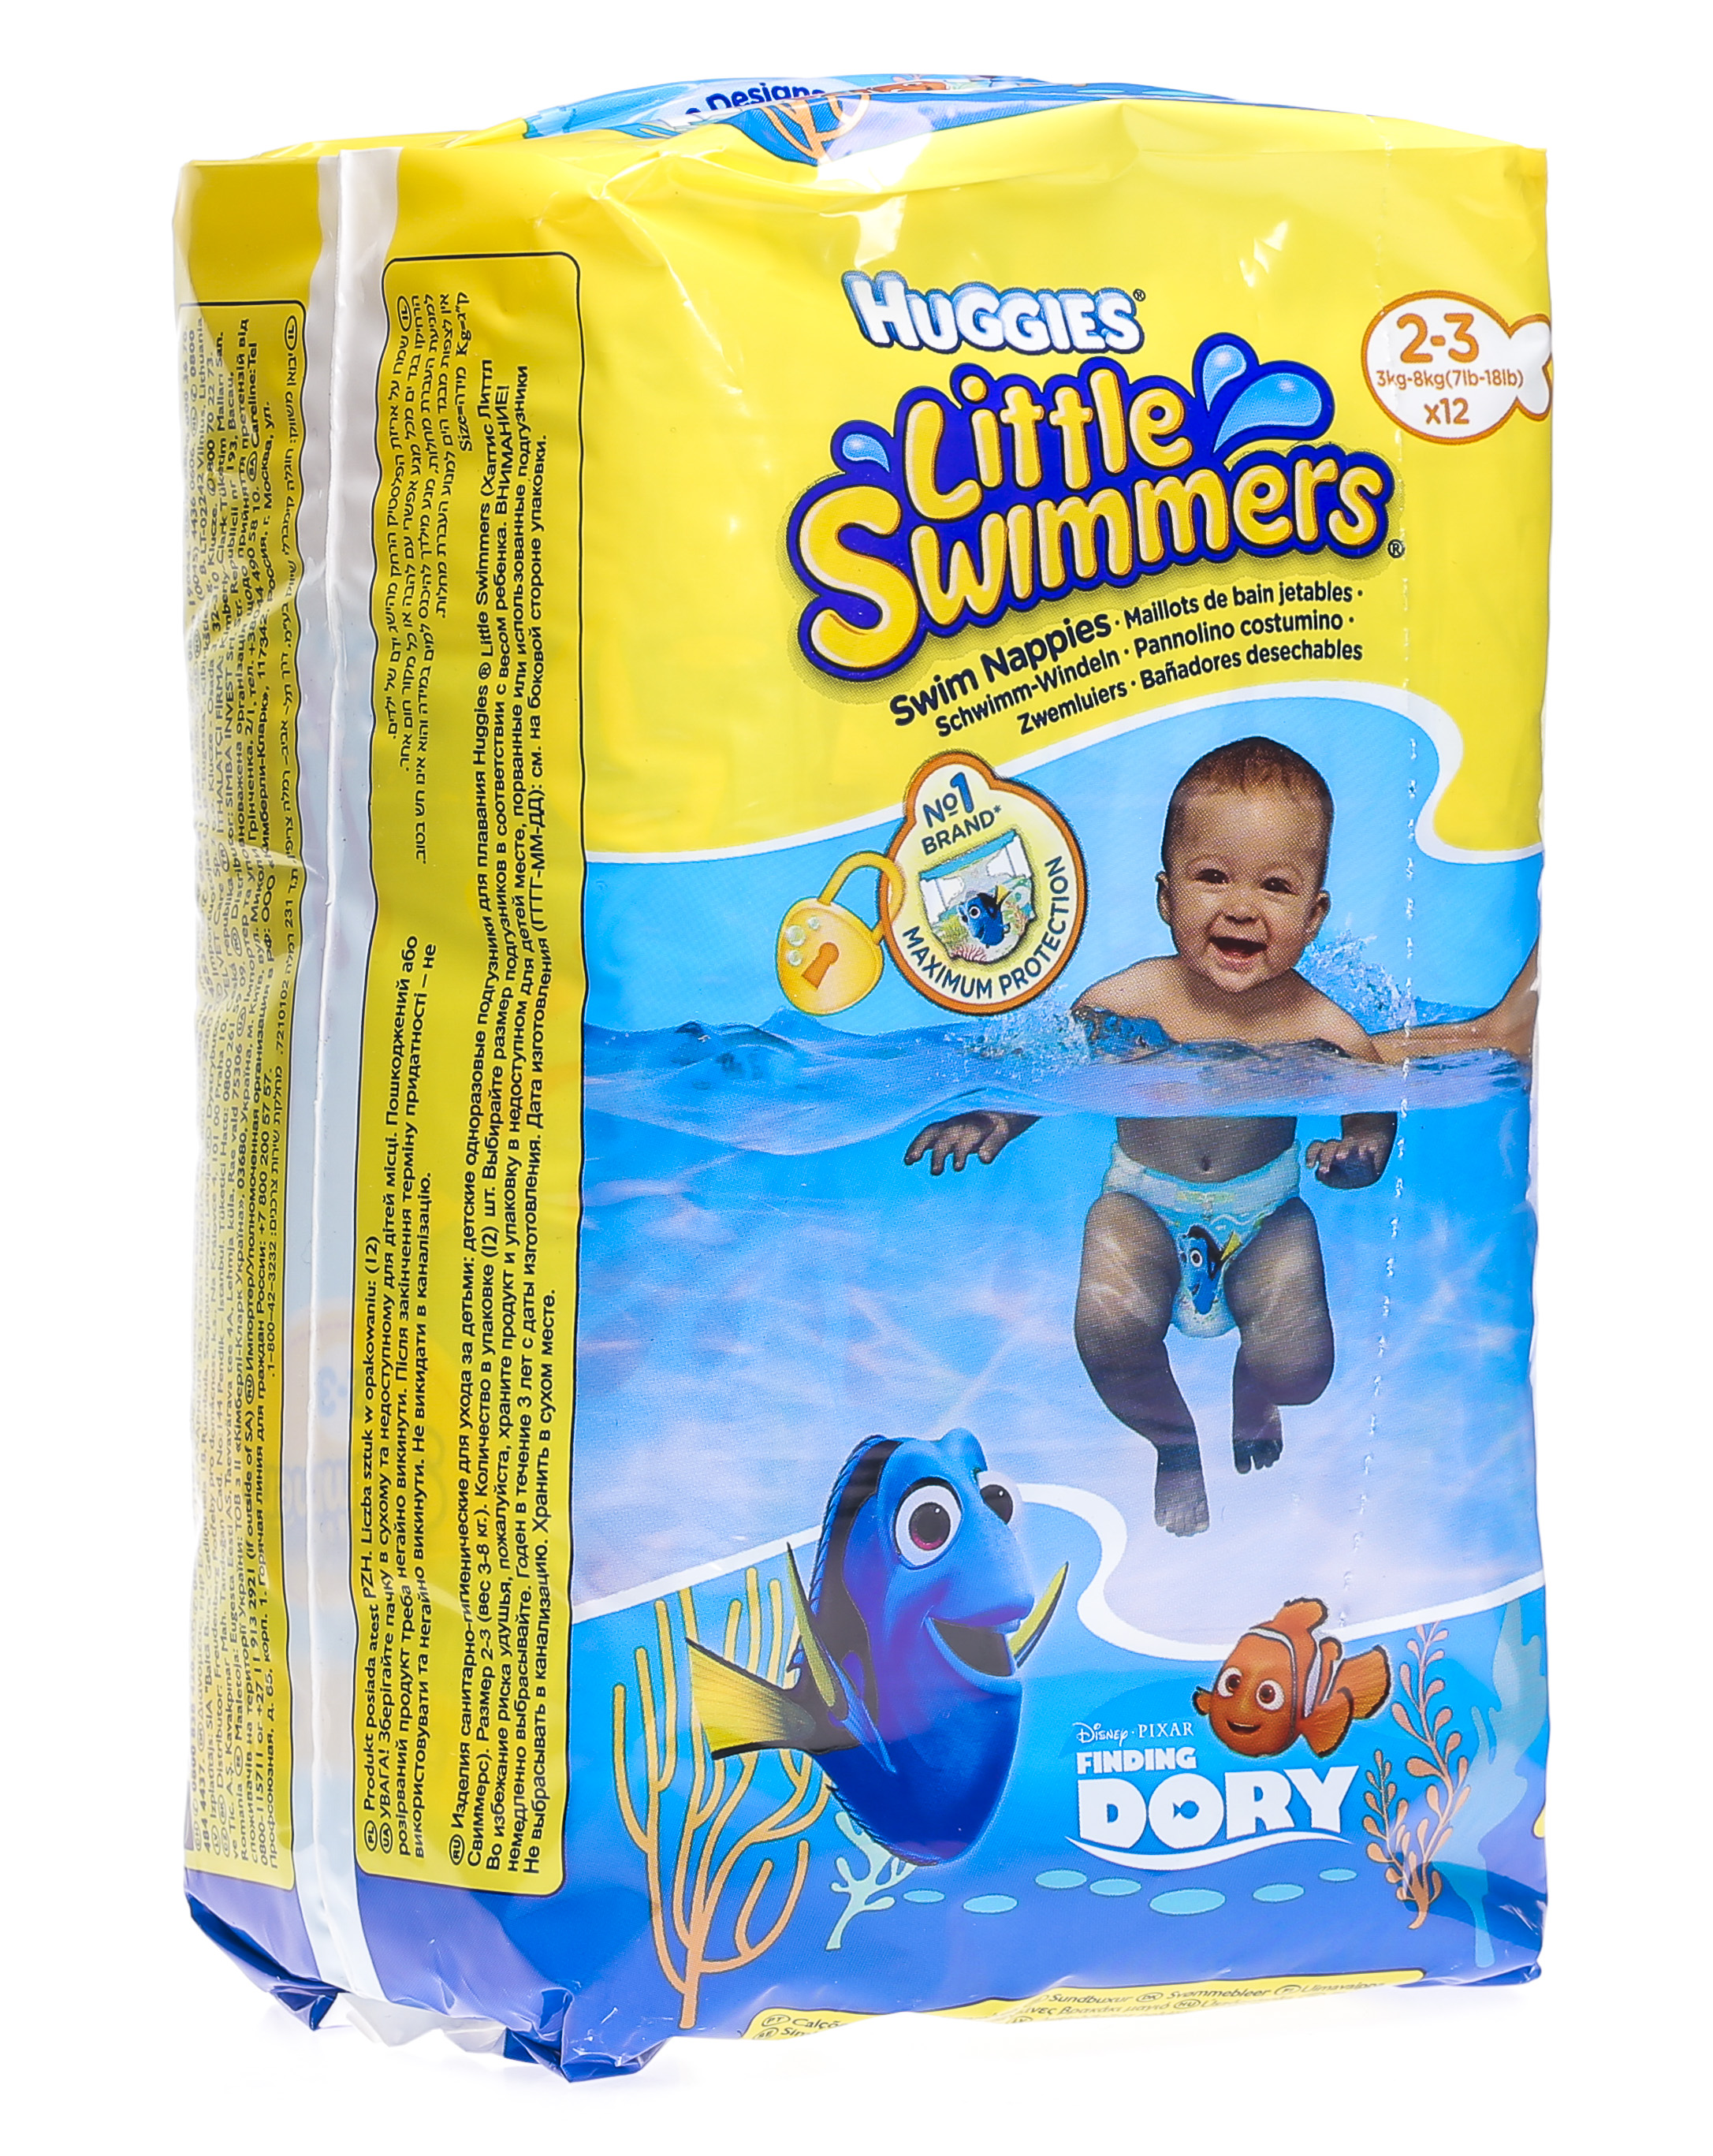 Couches piscine Huggies taille 2/3 - Huggies - 6 mois